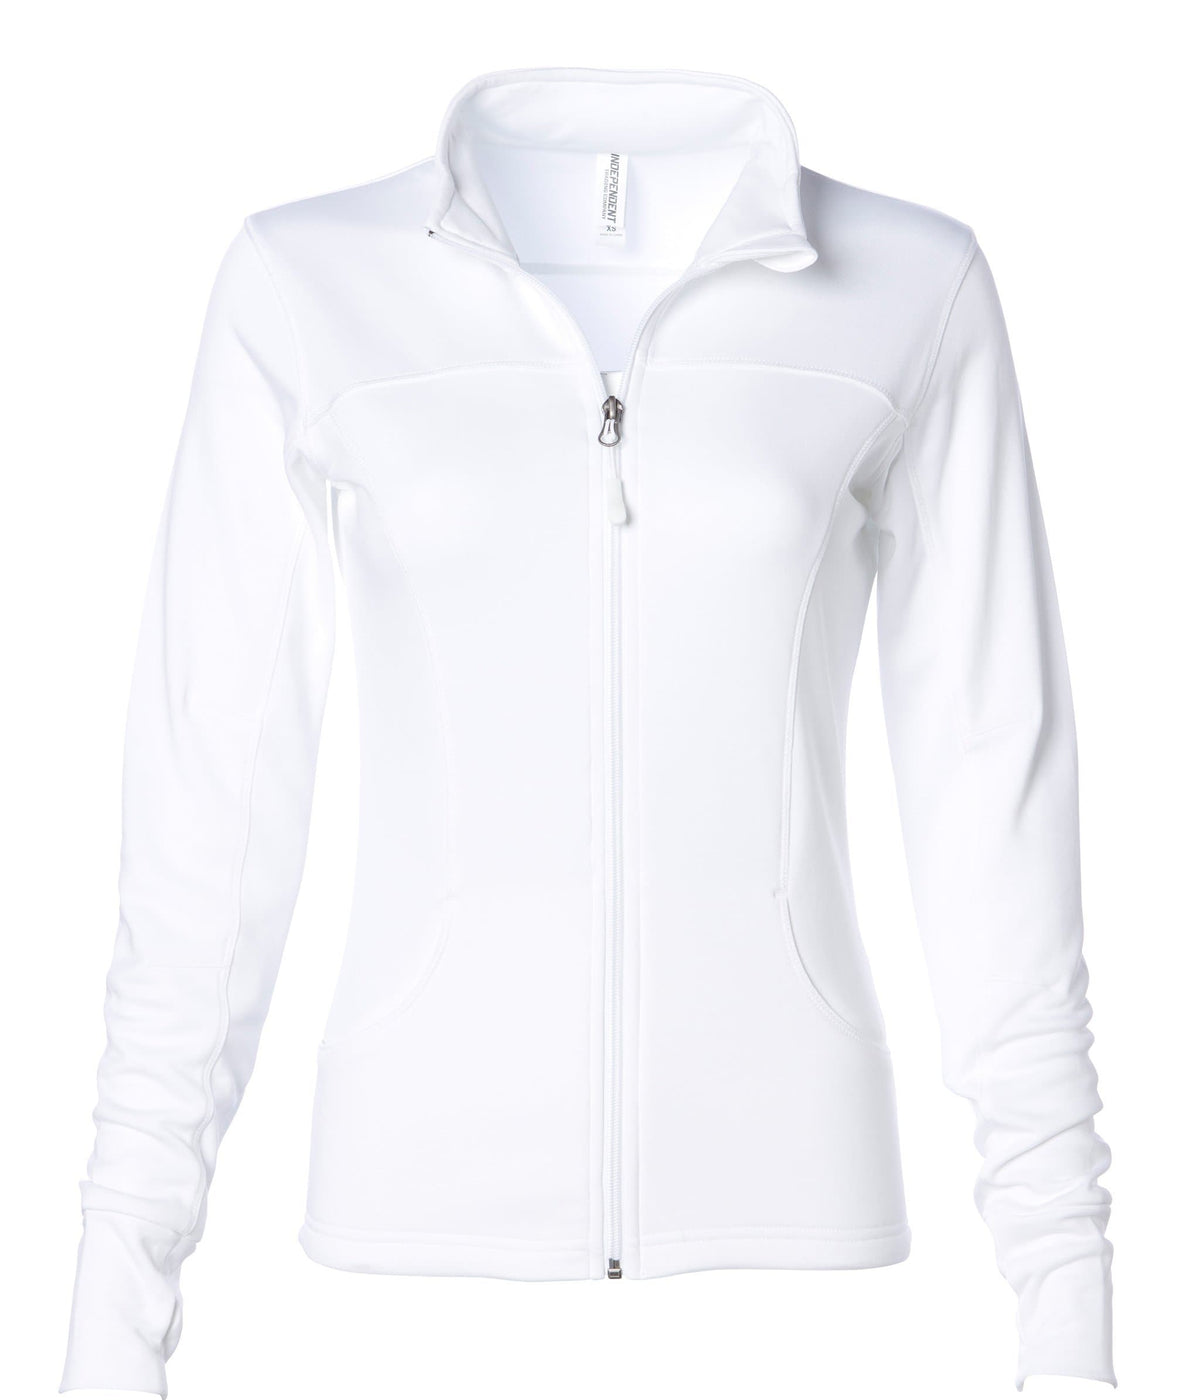 EXP60PAZ - Womens Polyester Athlectic Zip